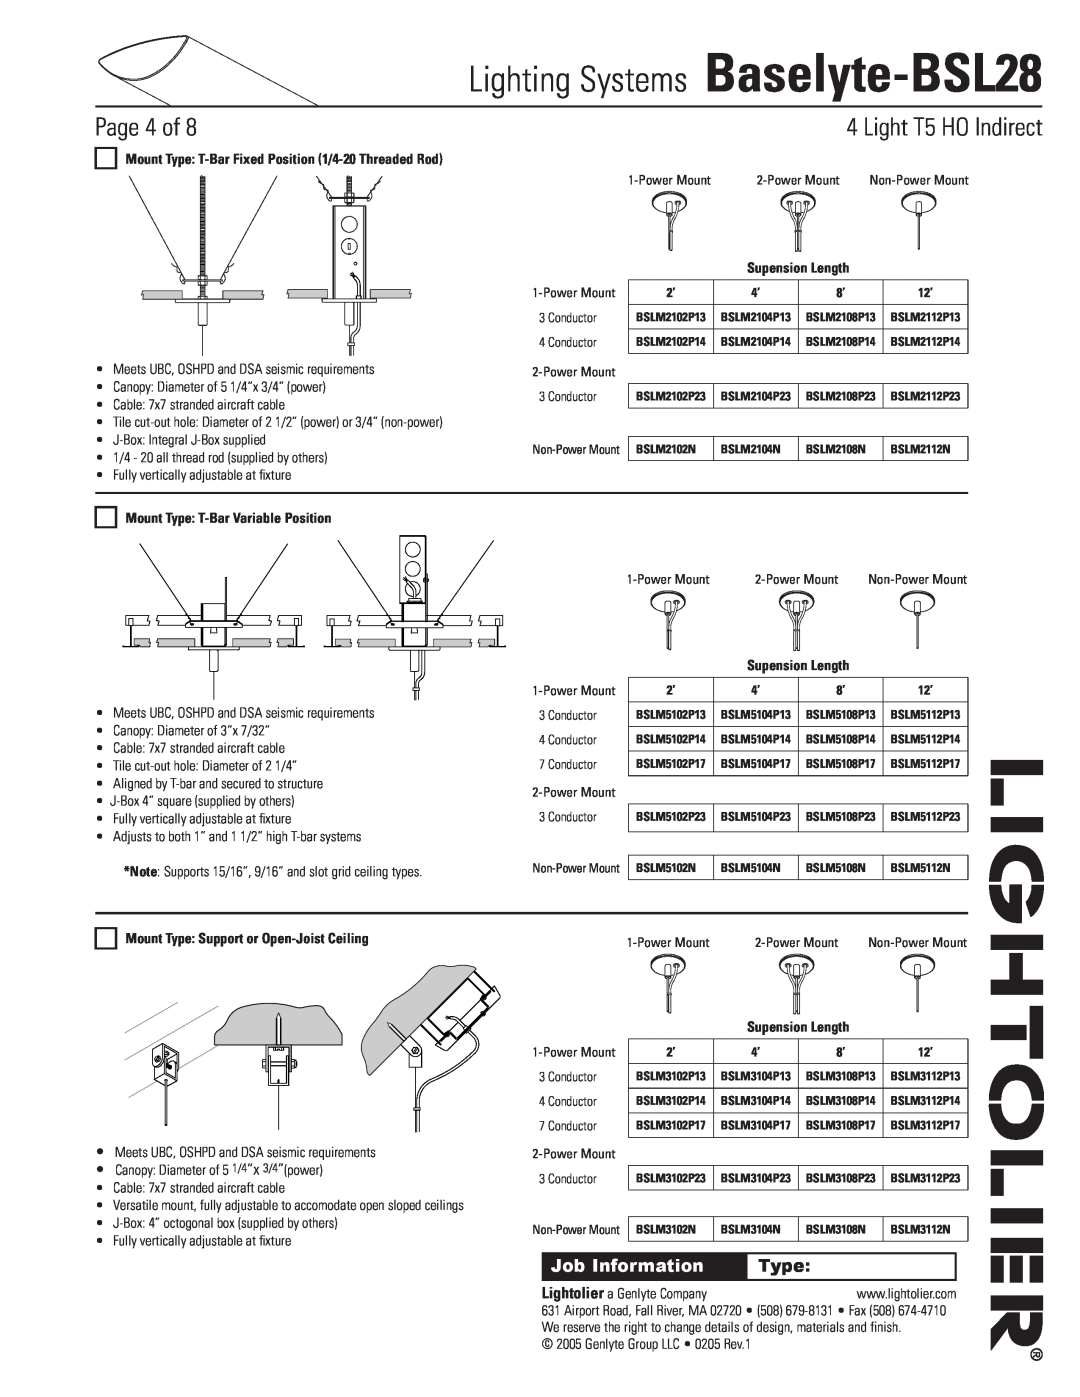 Lightolier Baselyte-BSL28 Page of, Mount Type T-BarVariable Position, Mount Type Support or Open-JoistCeiling 